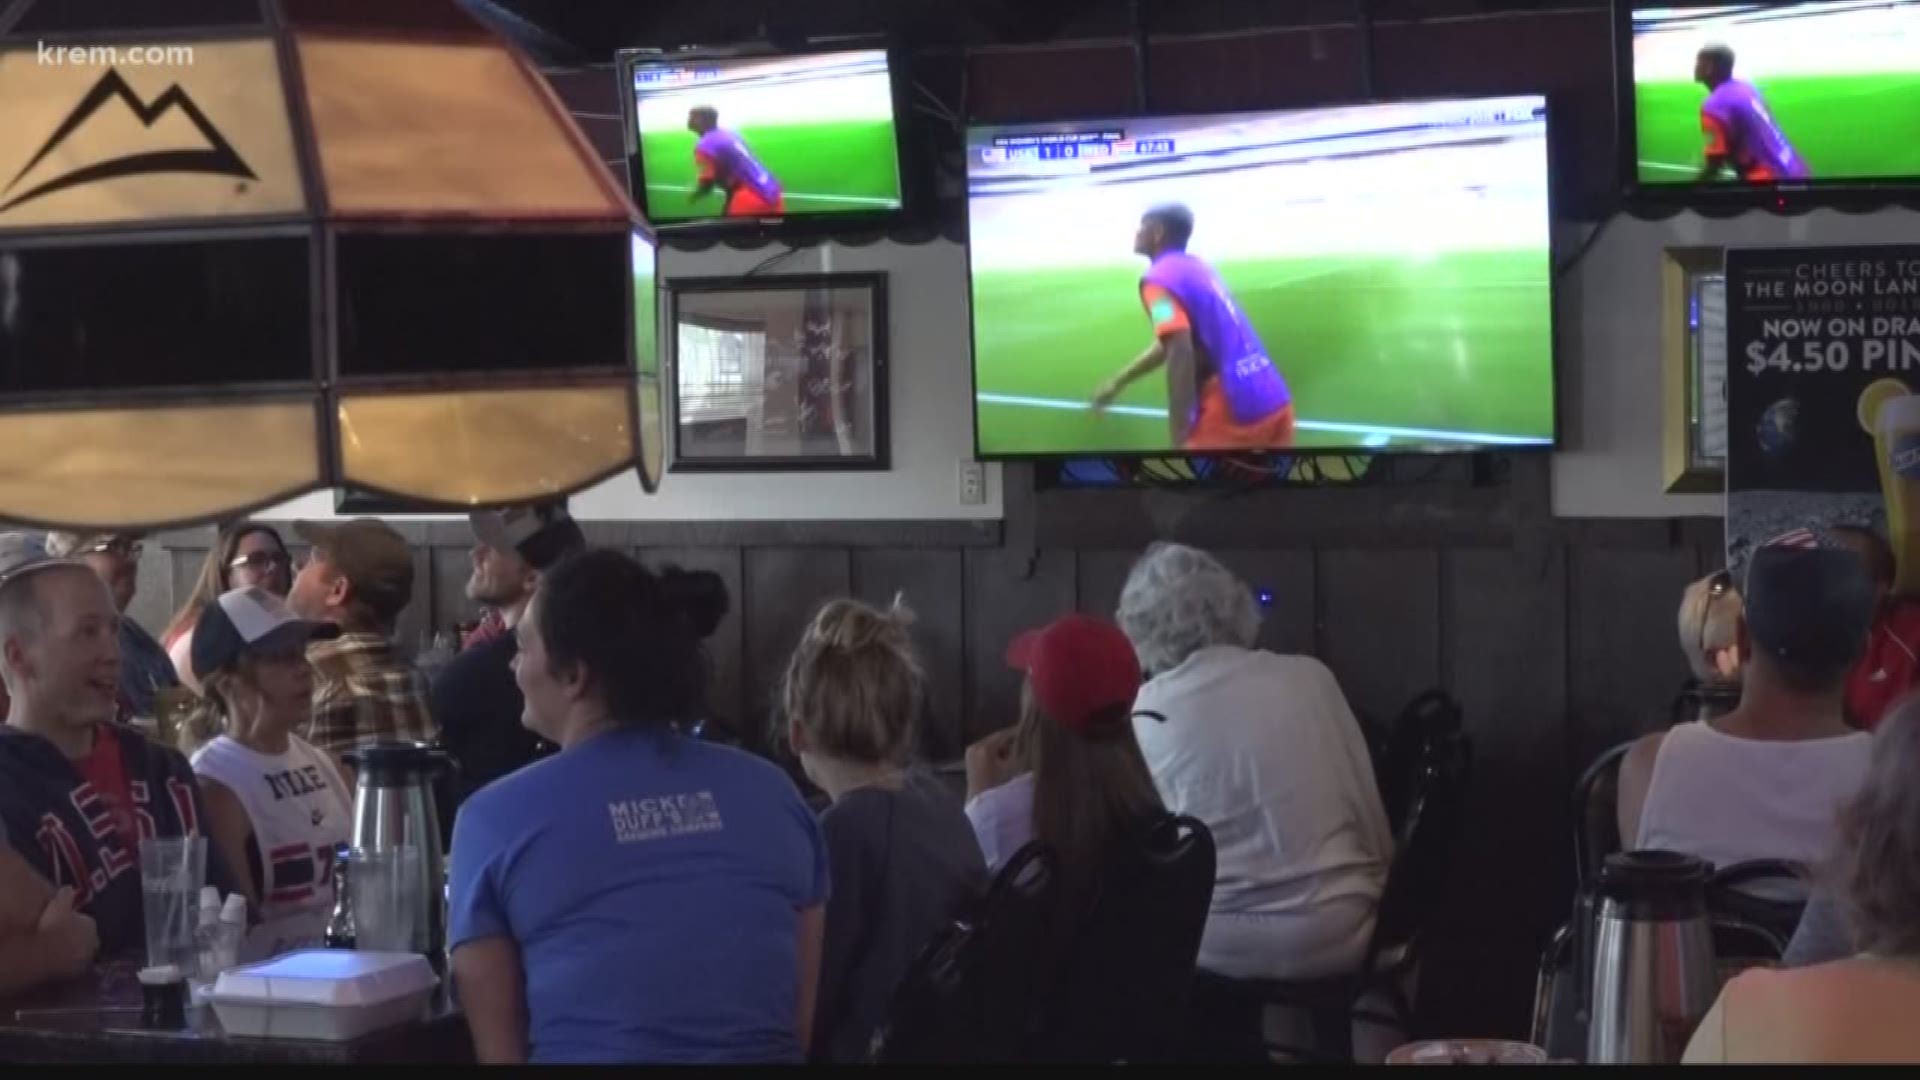 The US Women's Soccer Team won the World Cup Final Sunday, and Shayna Waltower caught up with patrons watching the action at the Swinging Doors in downtown Spokane.